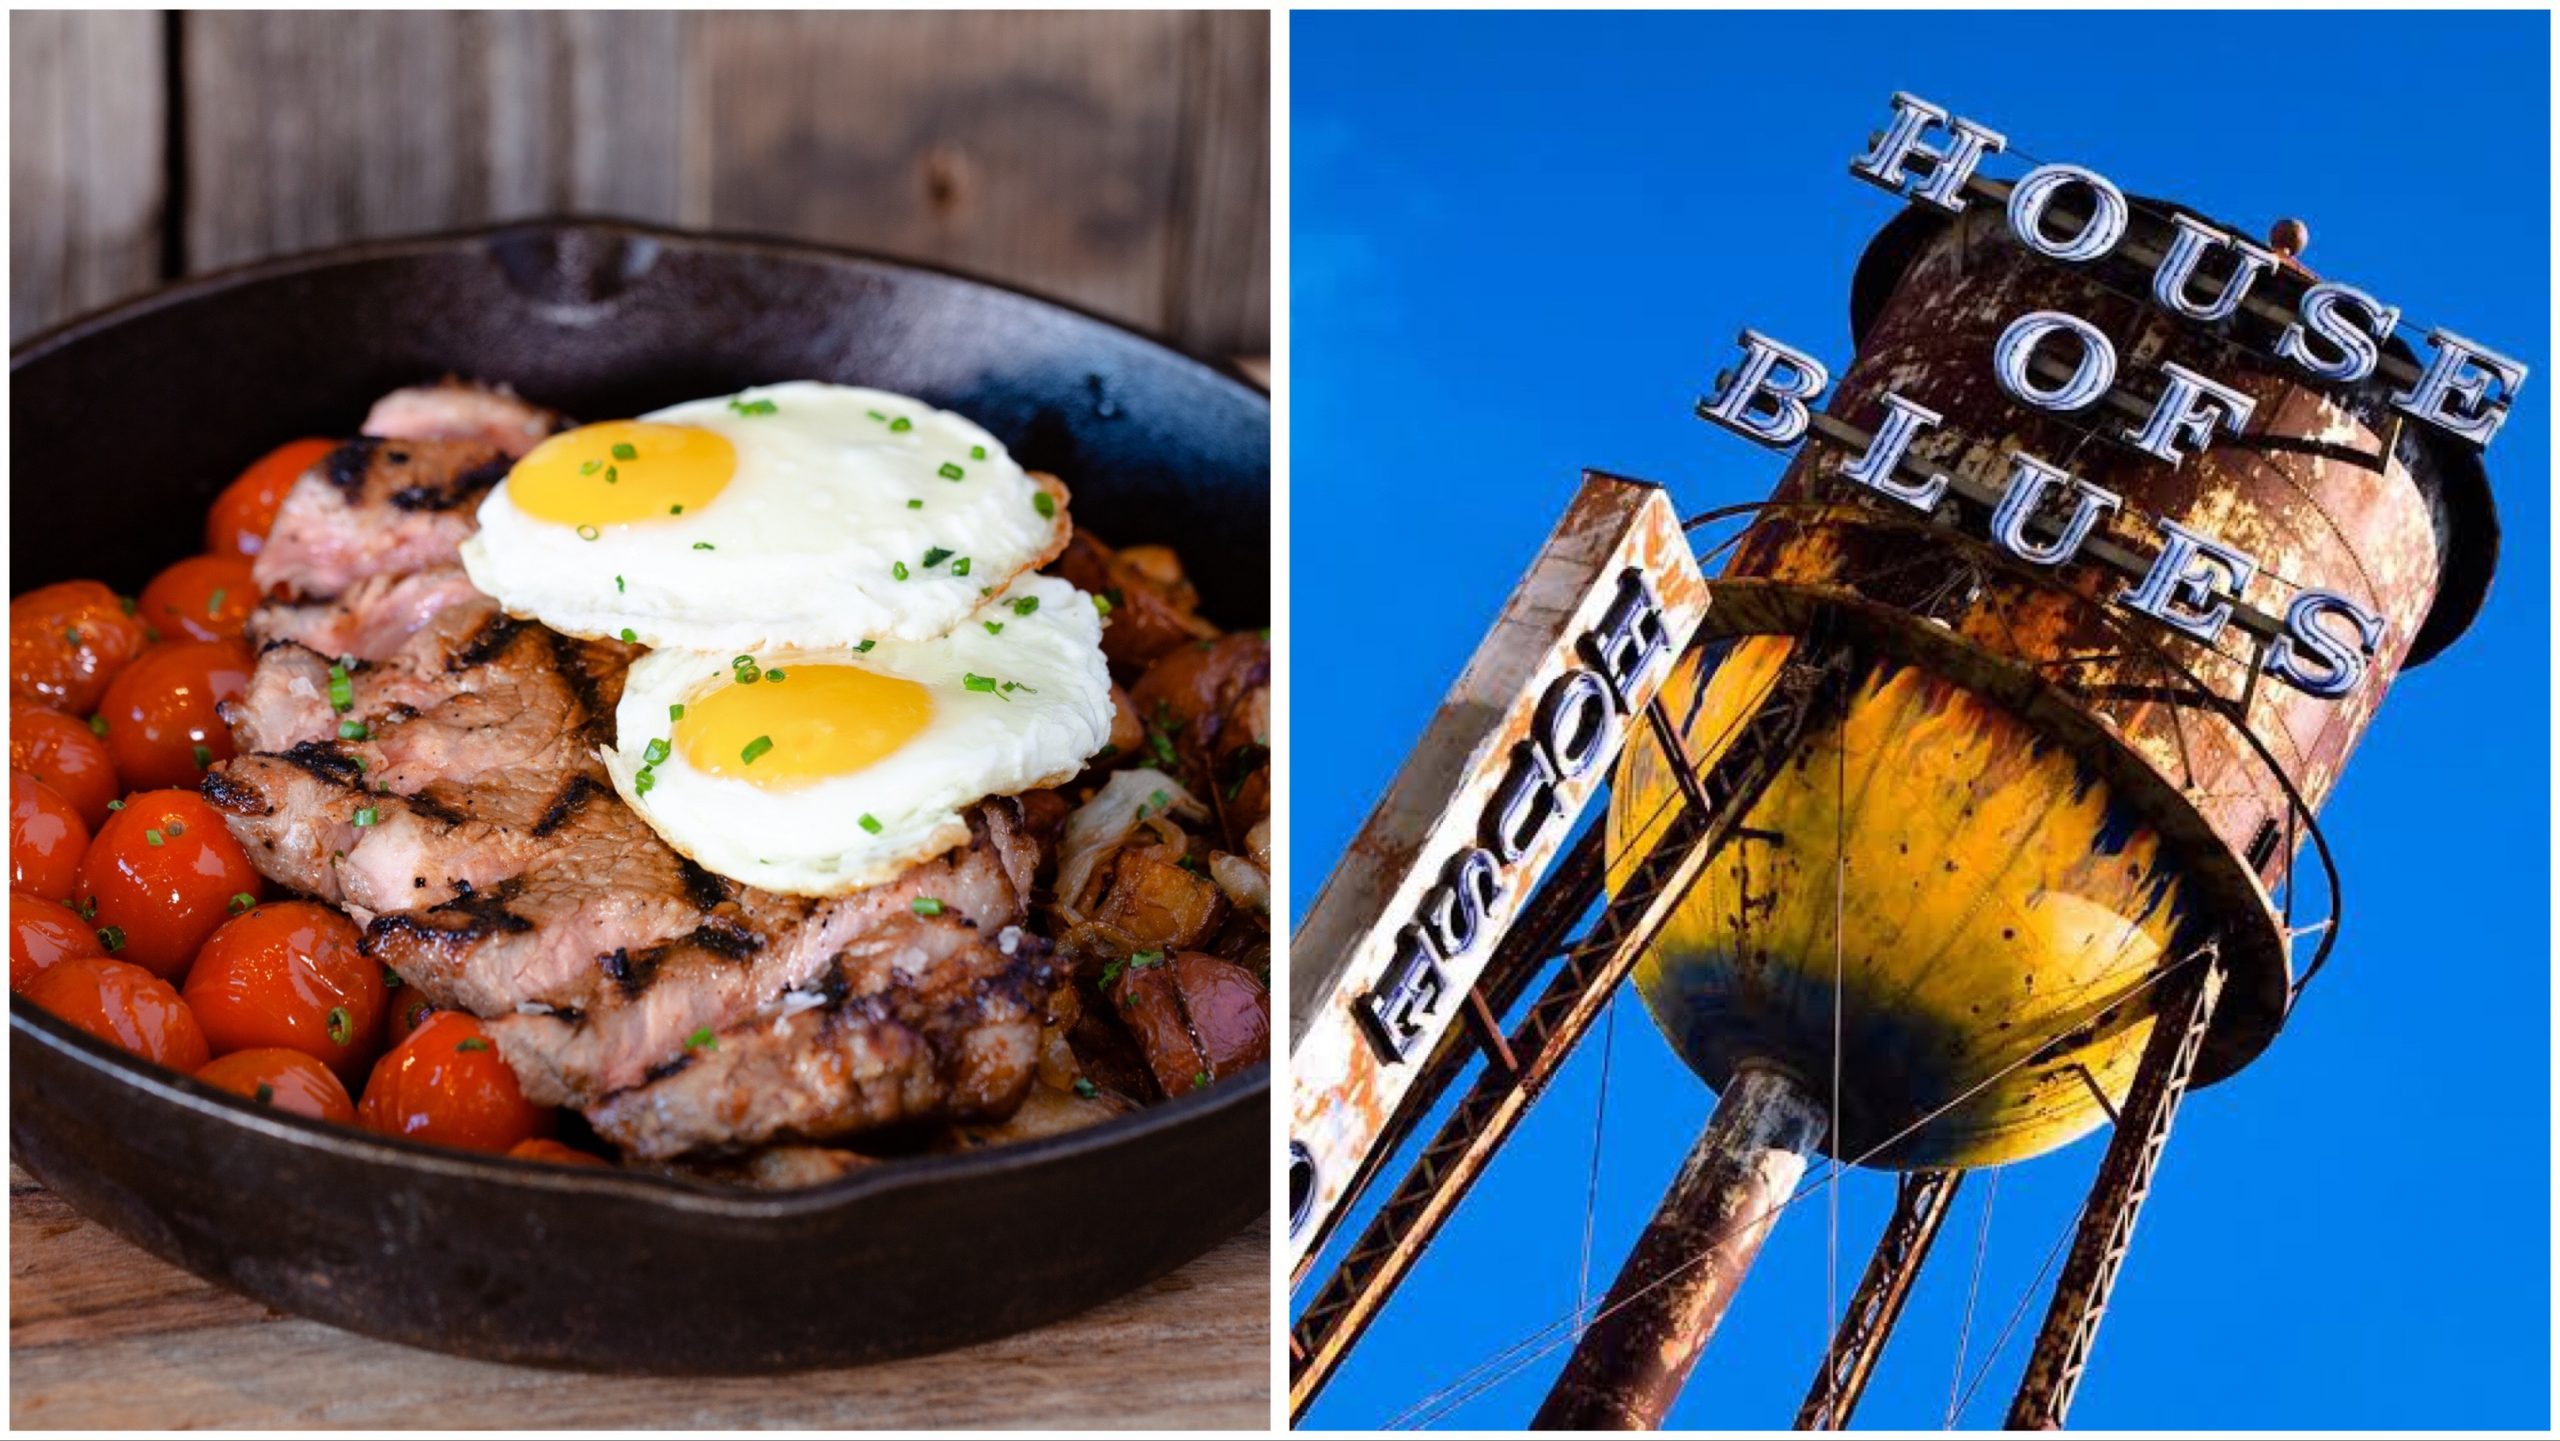 Weekend Brunch At House Of Blues Starting August 22nd!